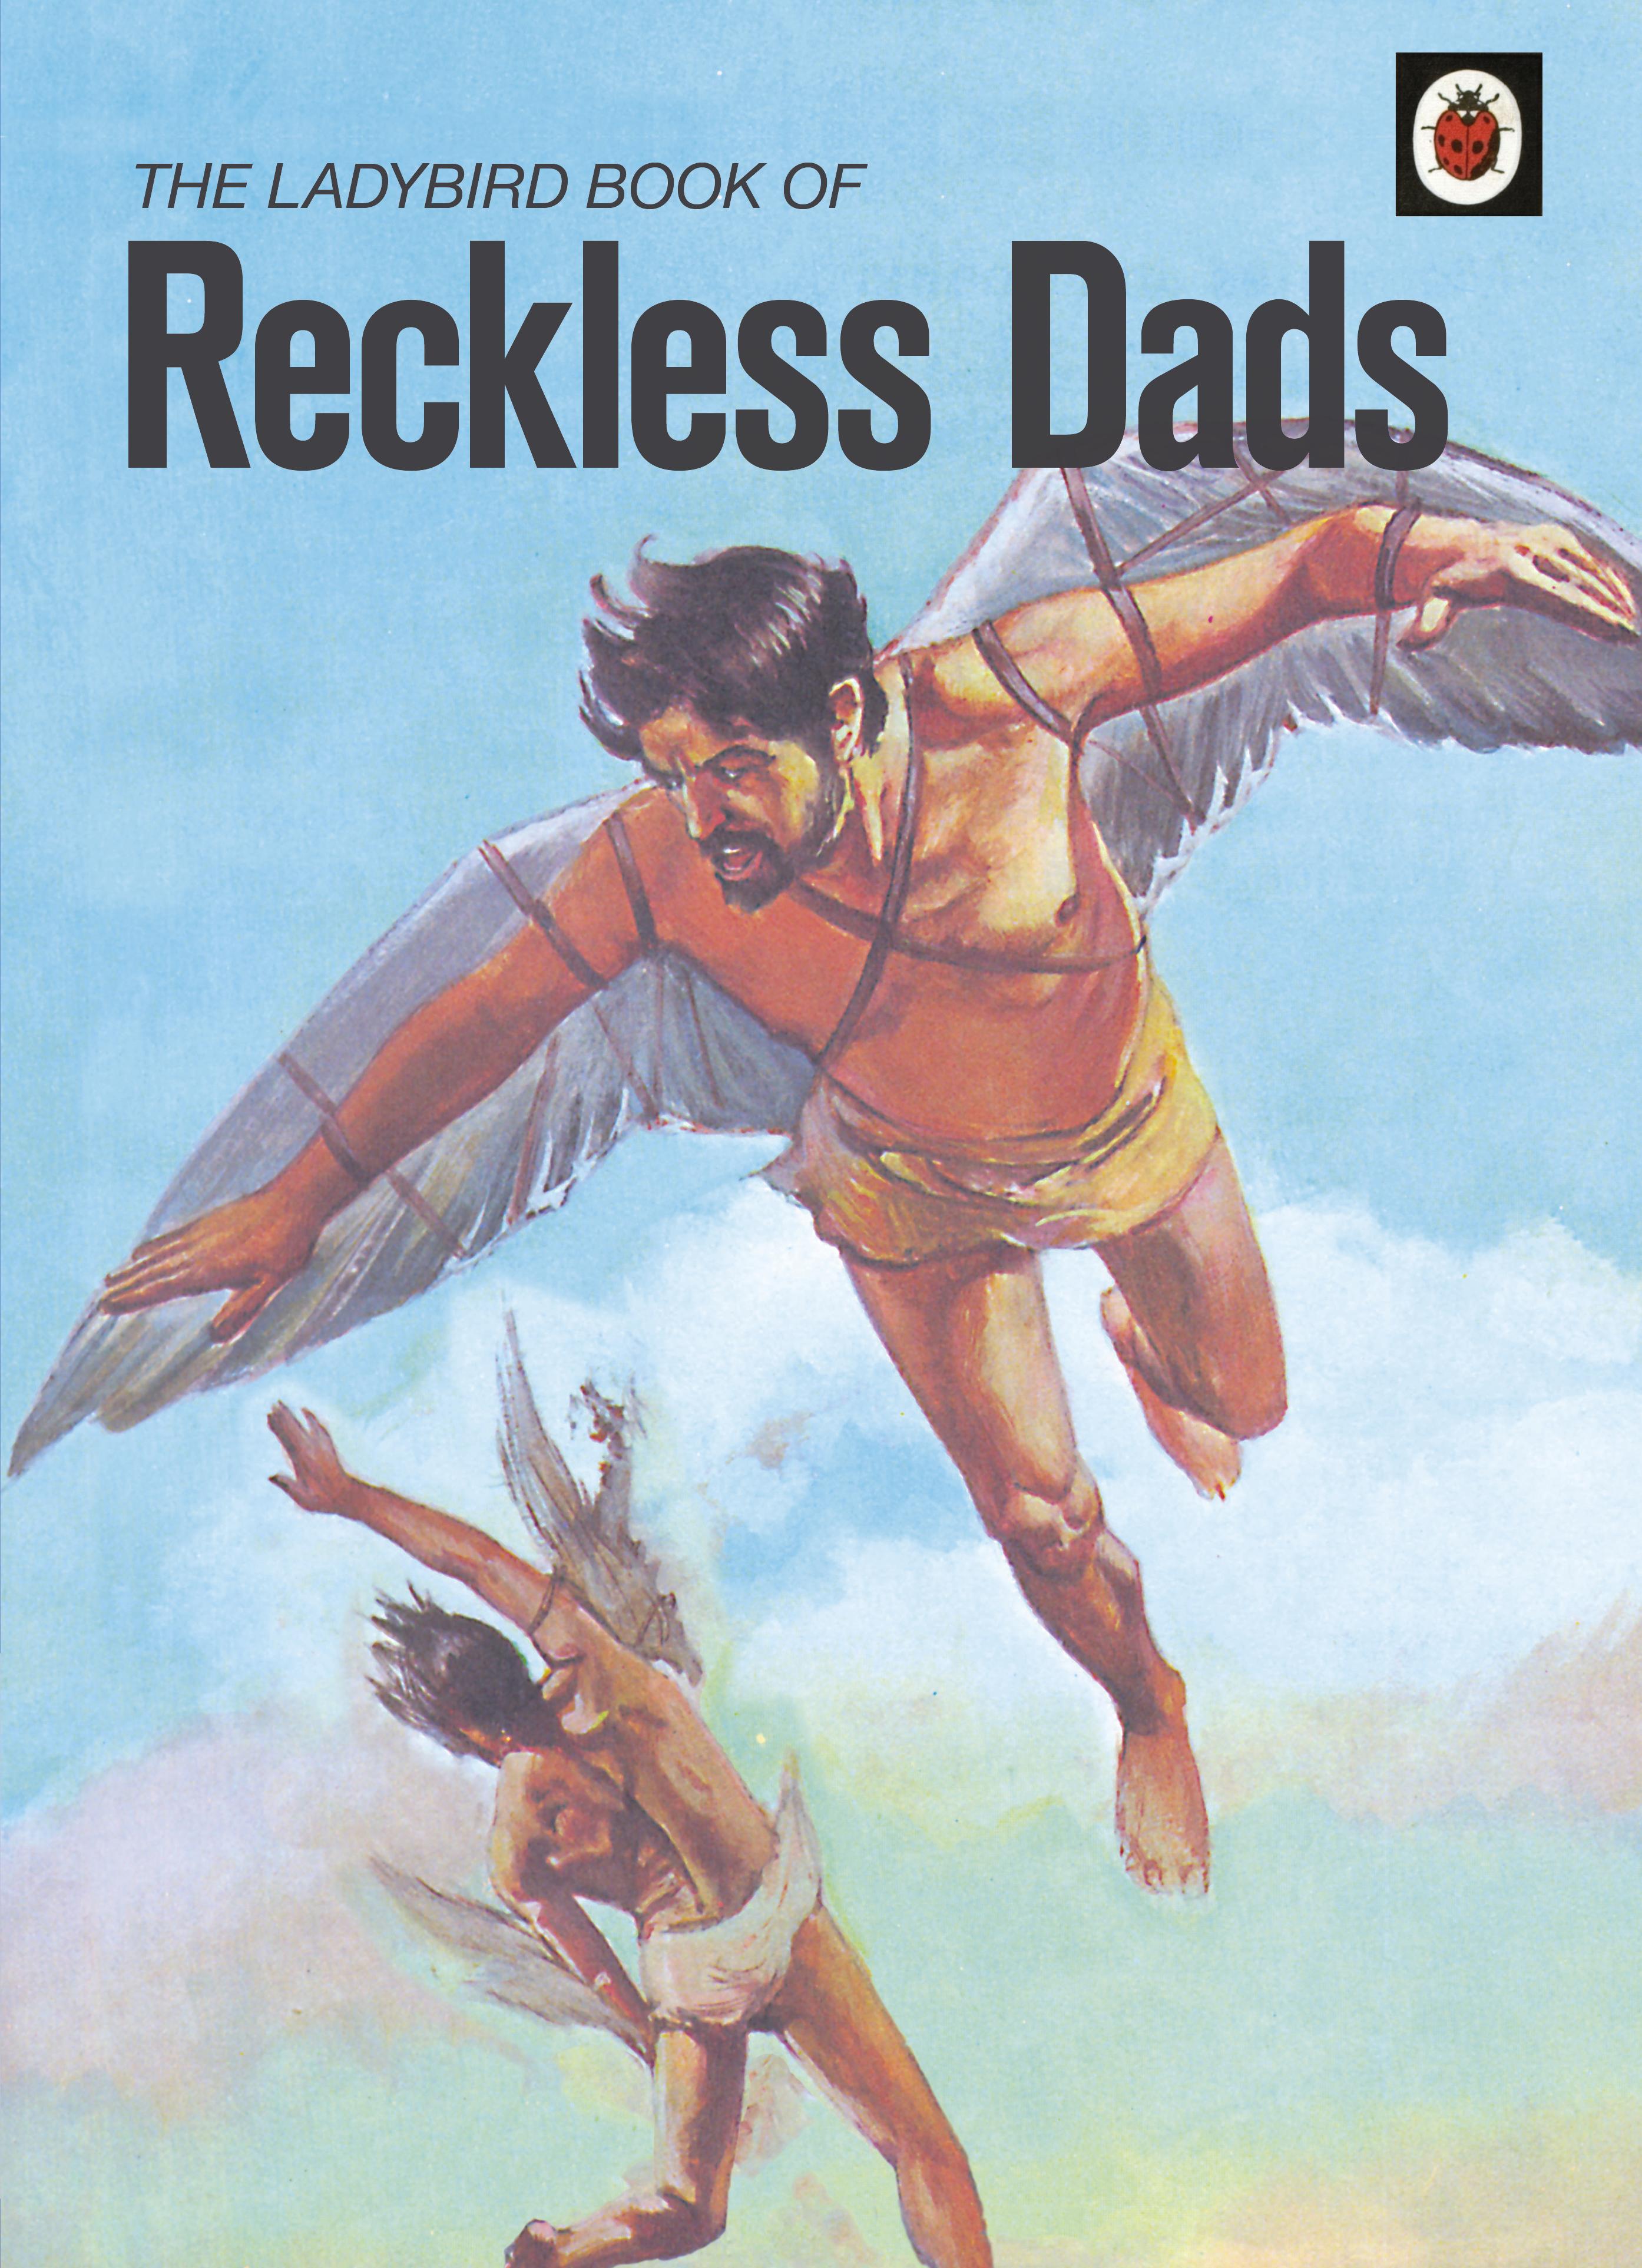 Reckless Dads